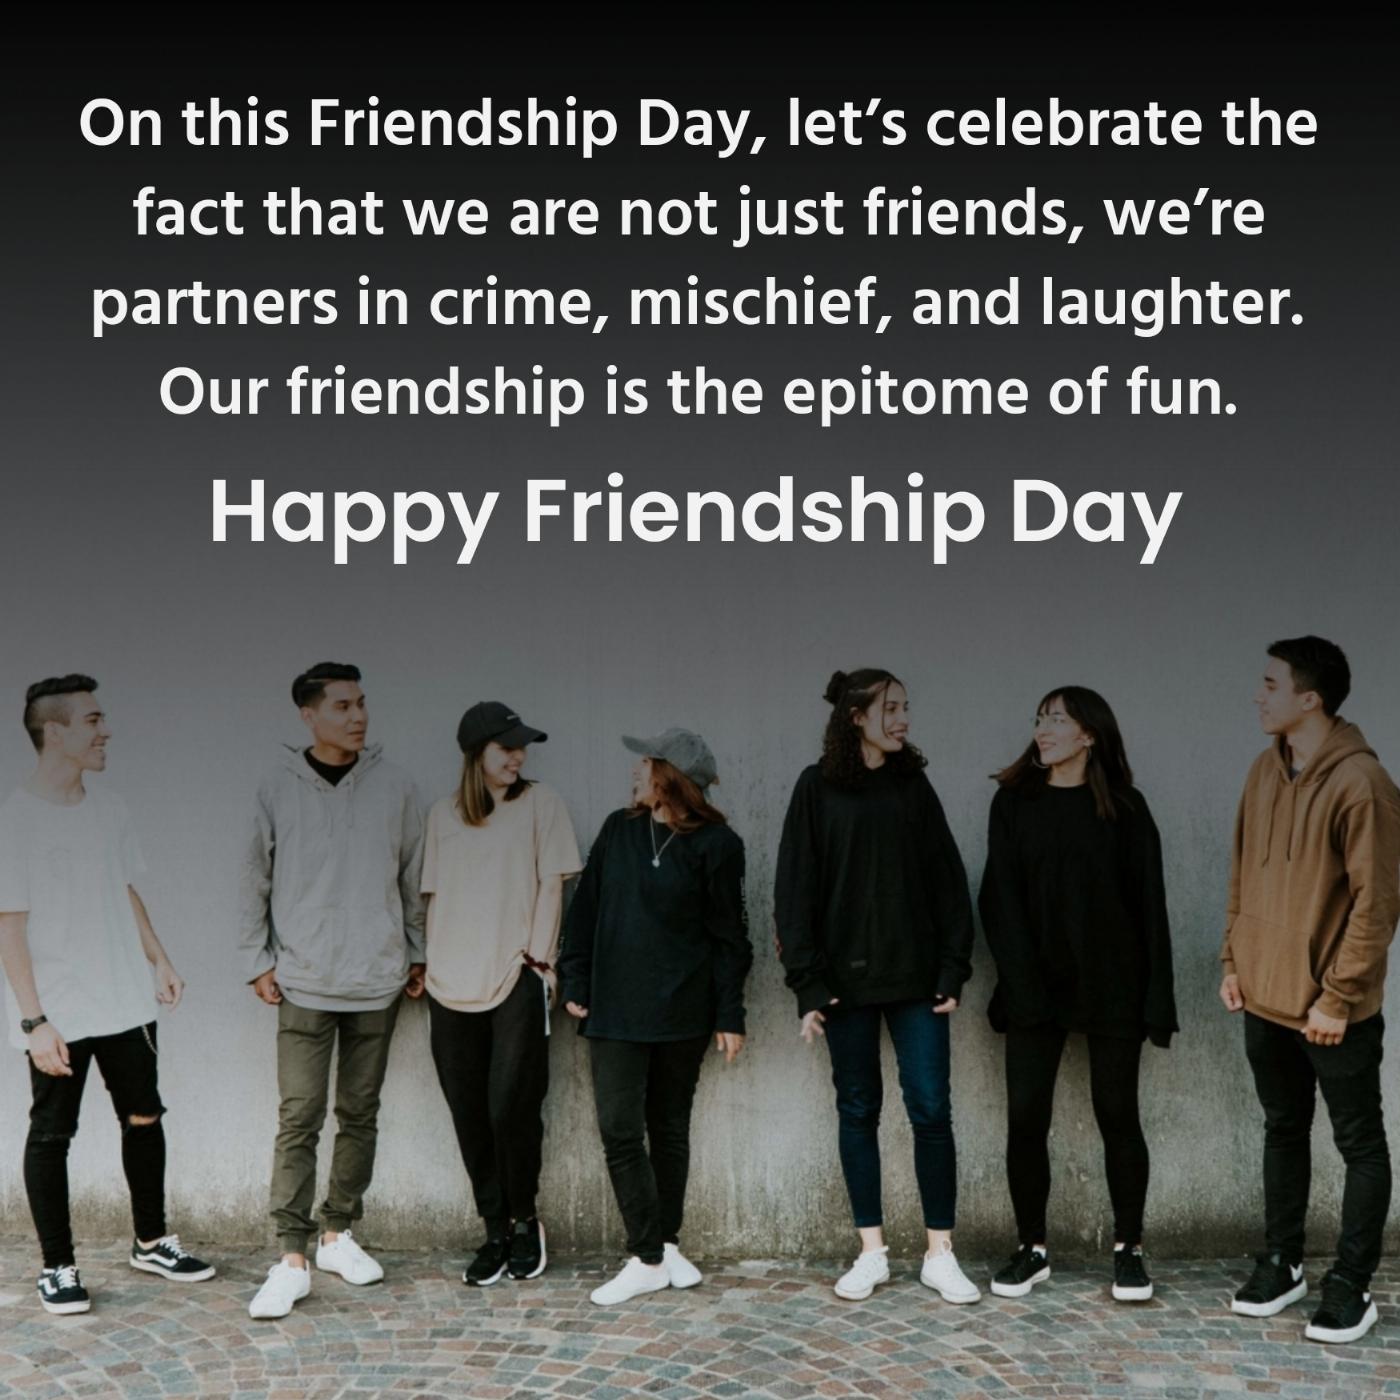 On this Friendship Day lets celebrate the fact that we are not just friends